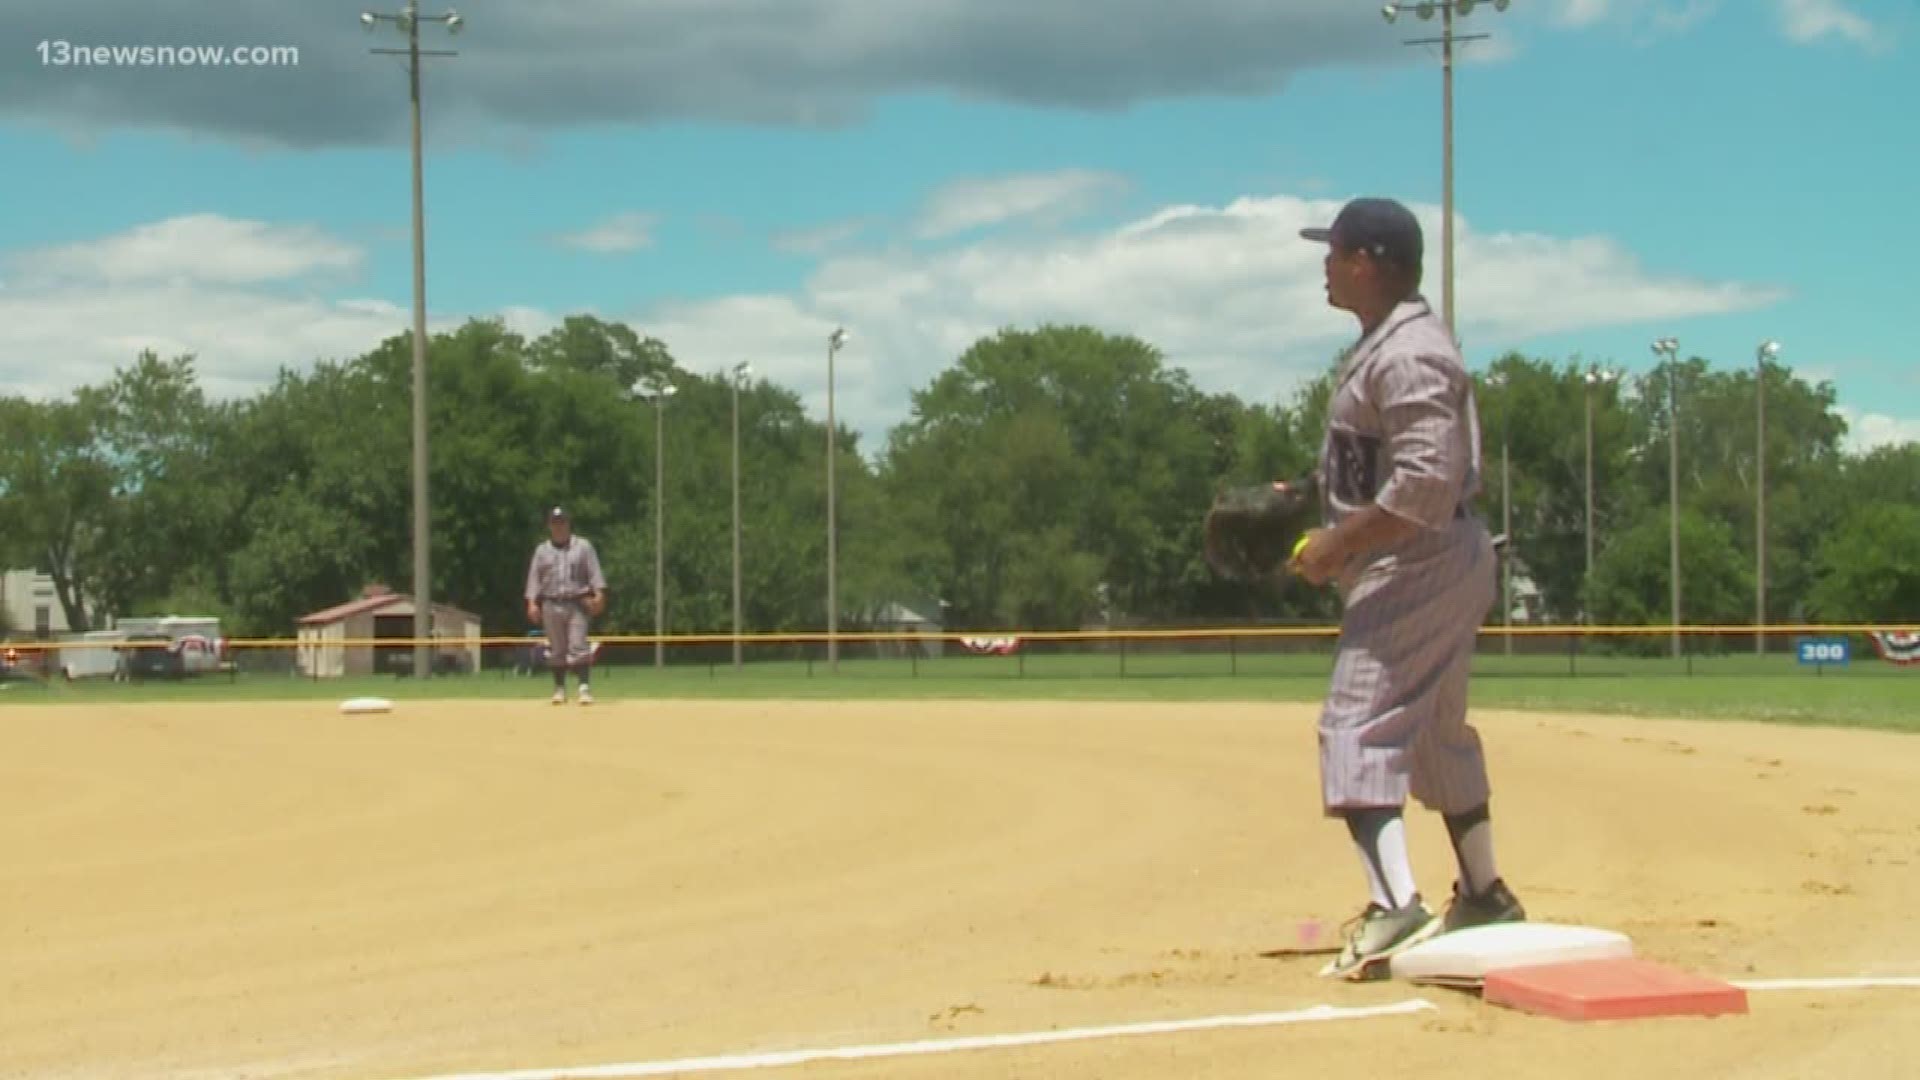 The players donned World War II-era uniforms and played on the same field where some baseball greats took their positions.